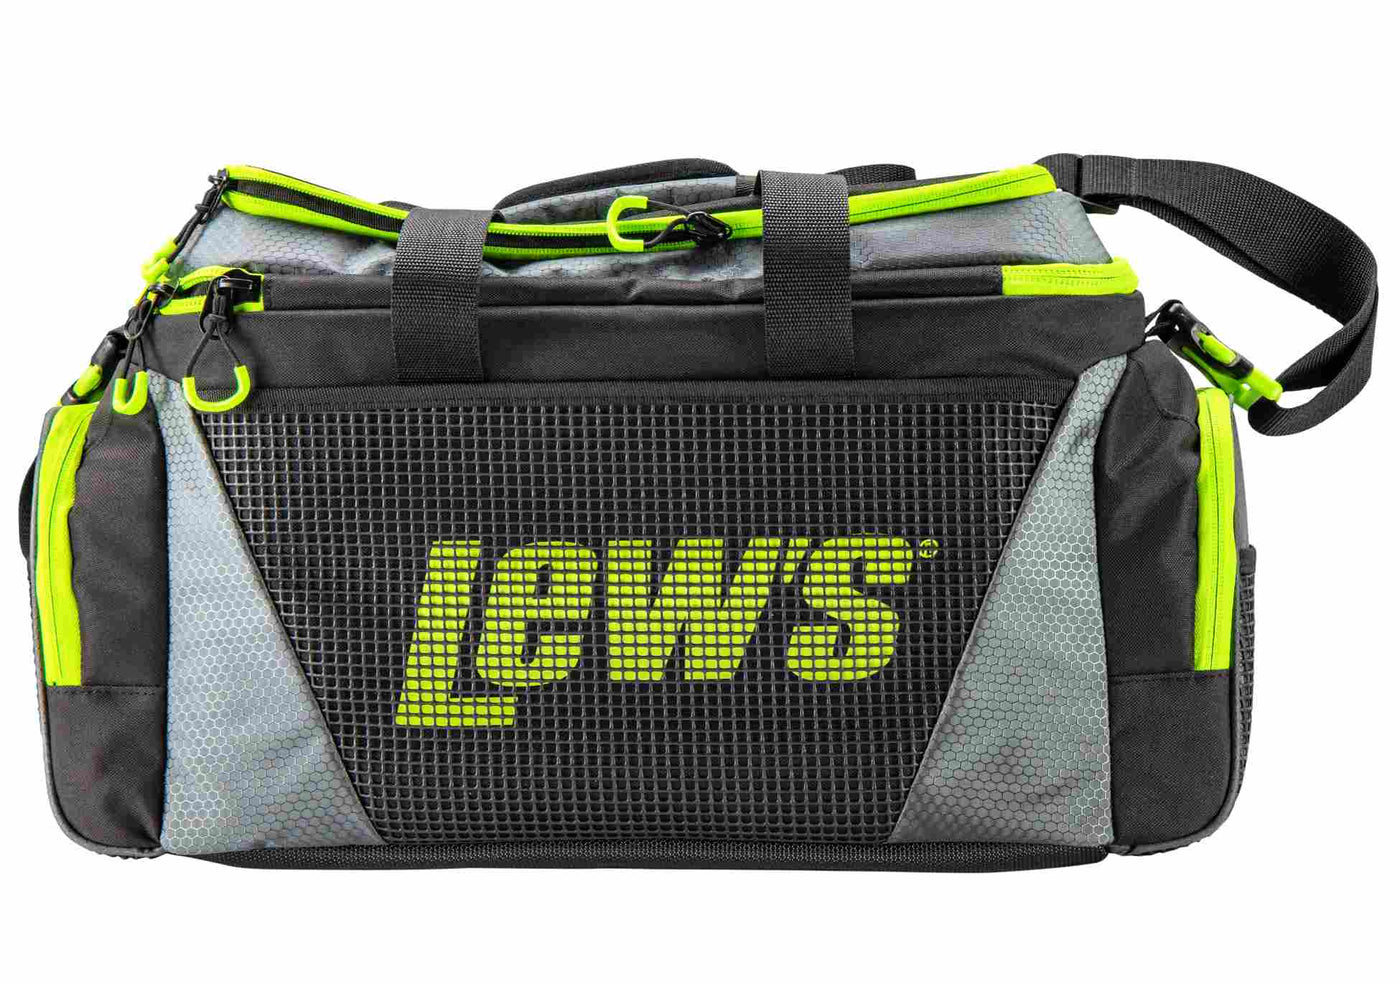 Portable Lew's Mach green and black fishing tackle bag